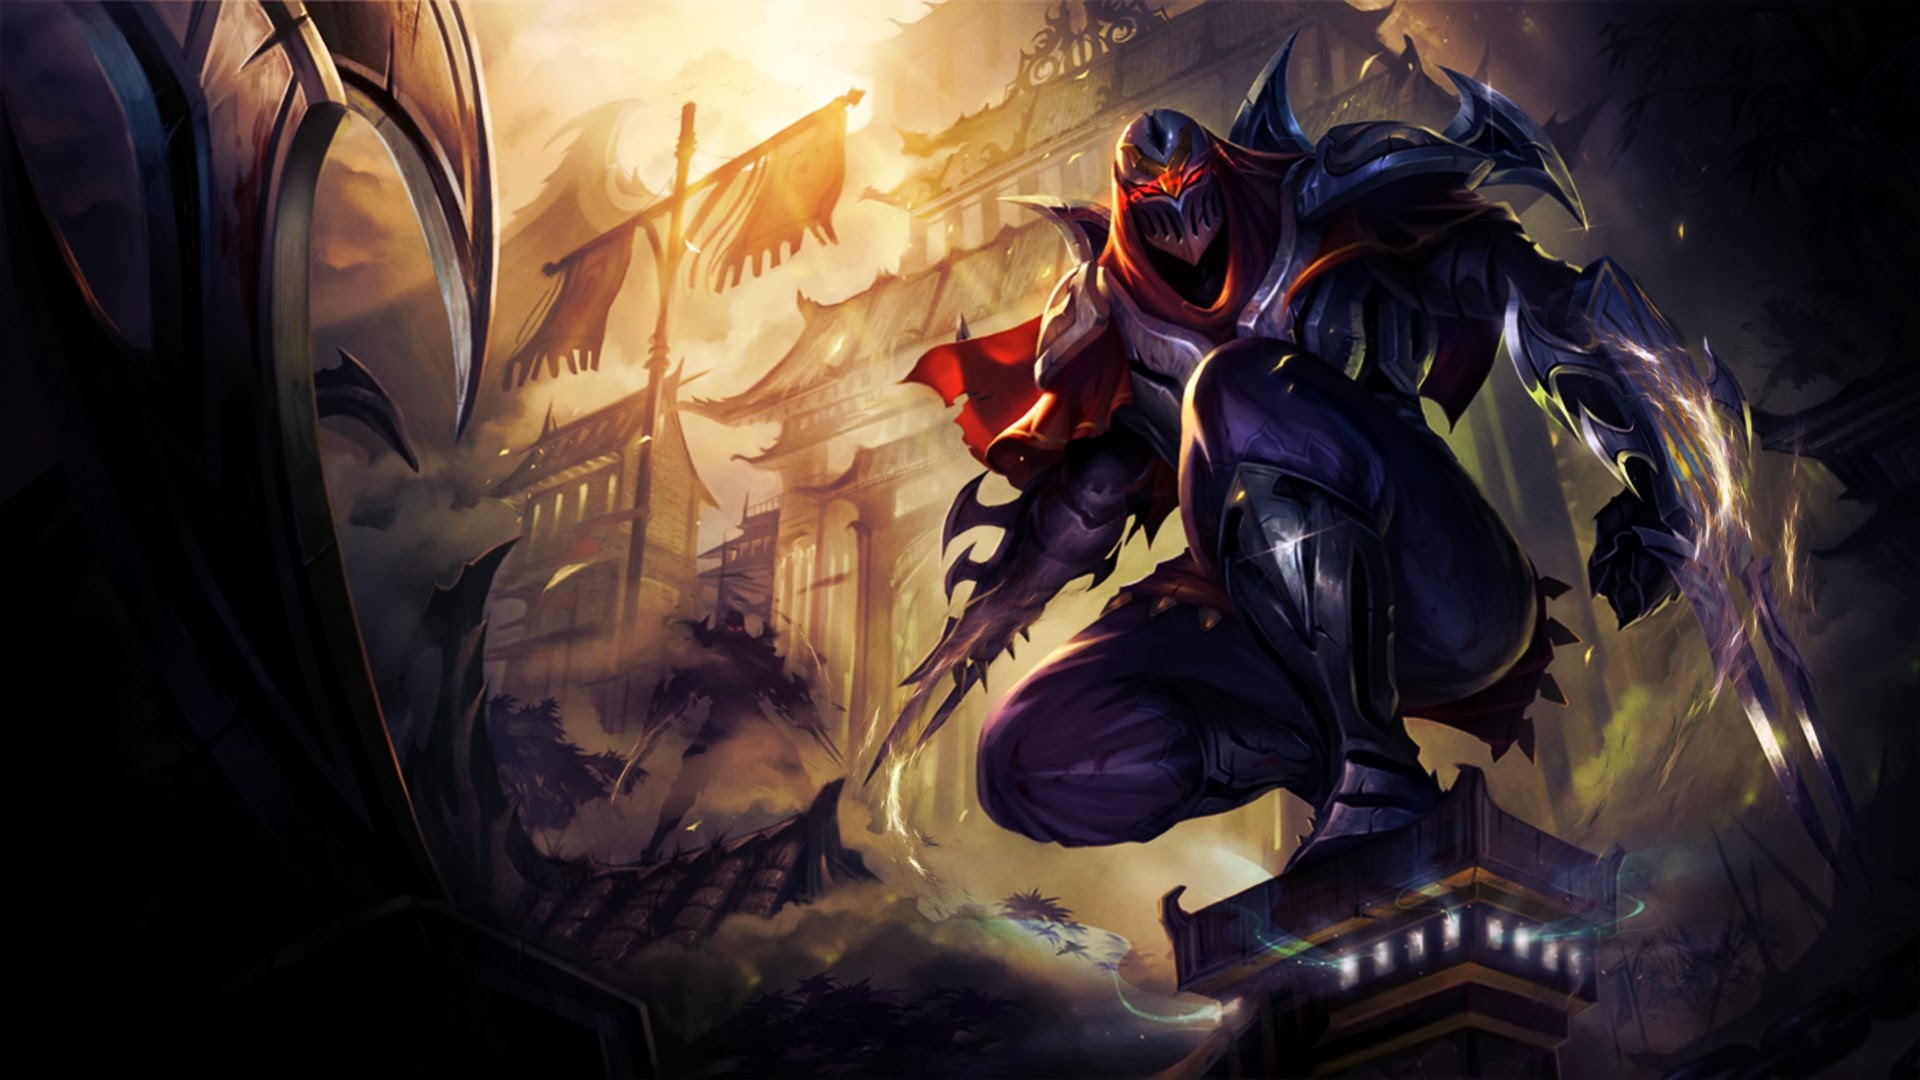 zed wallpaper 1920x1080,action adventure game,cg artwork,fictional character,illustration,darkness